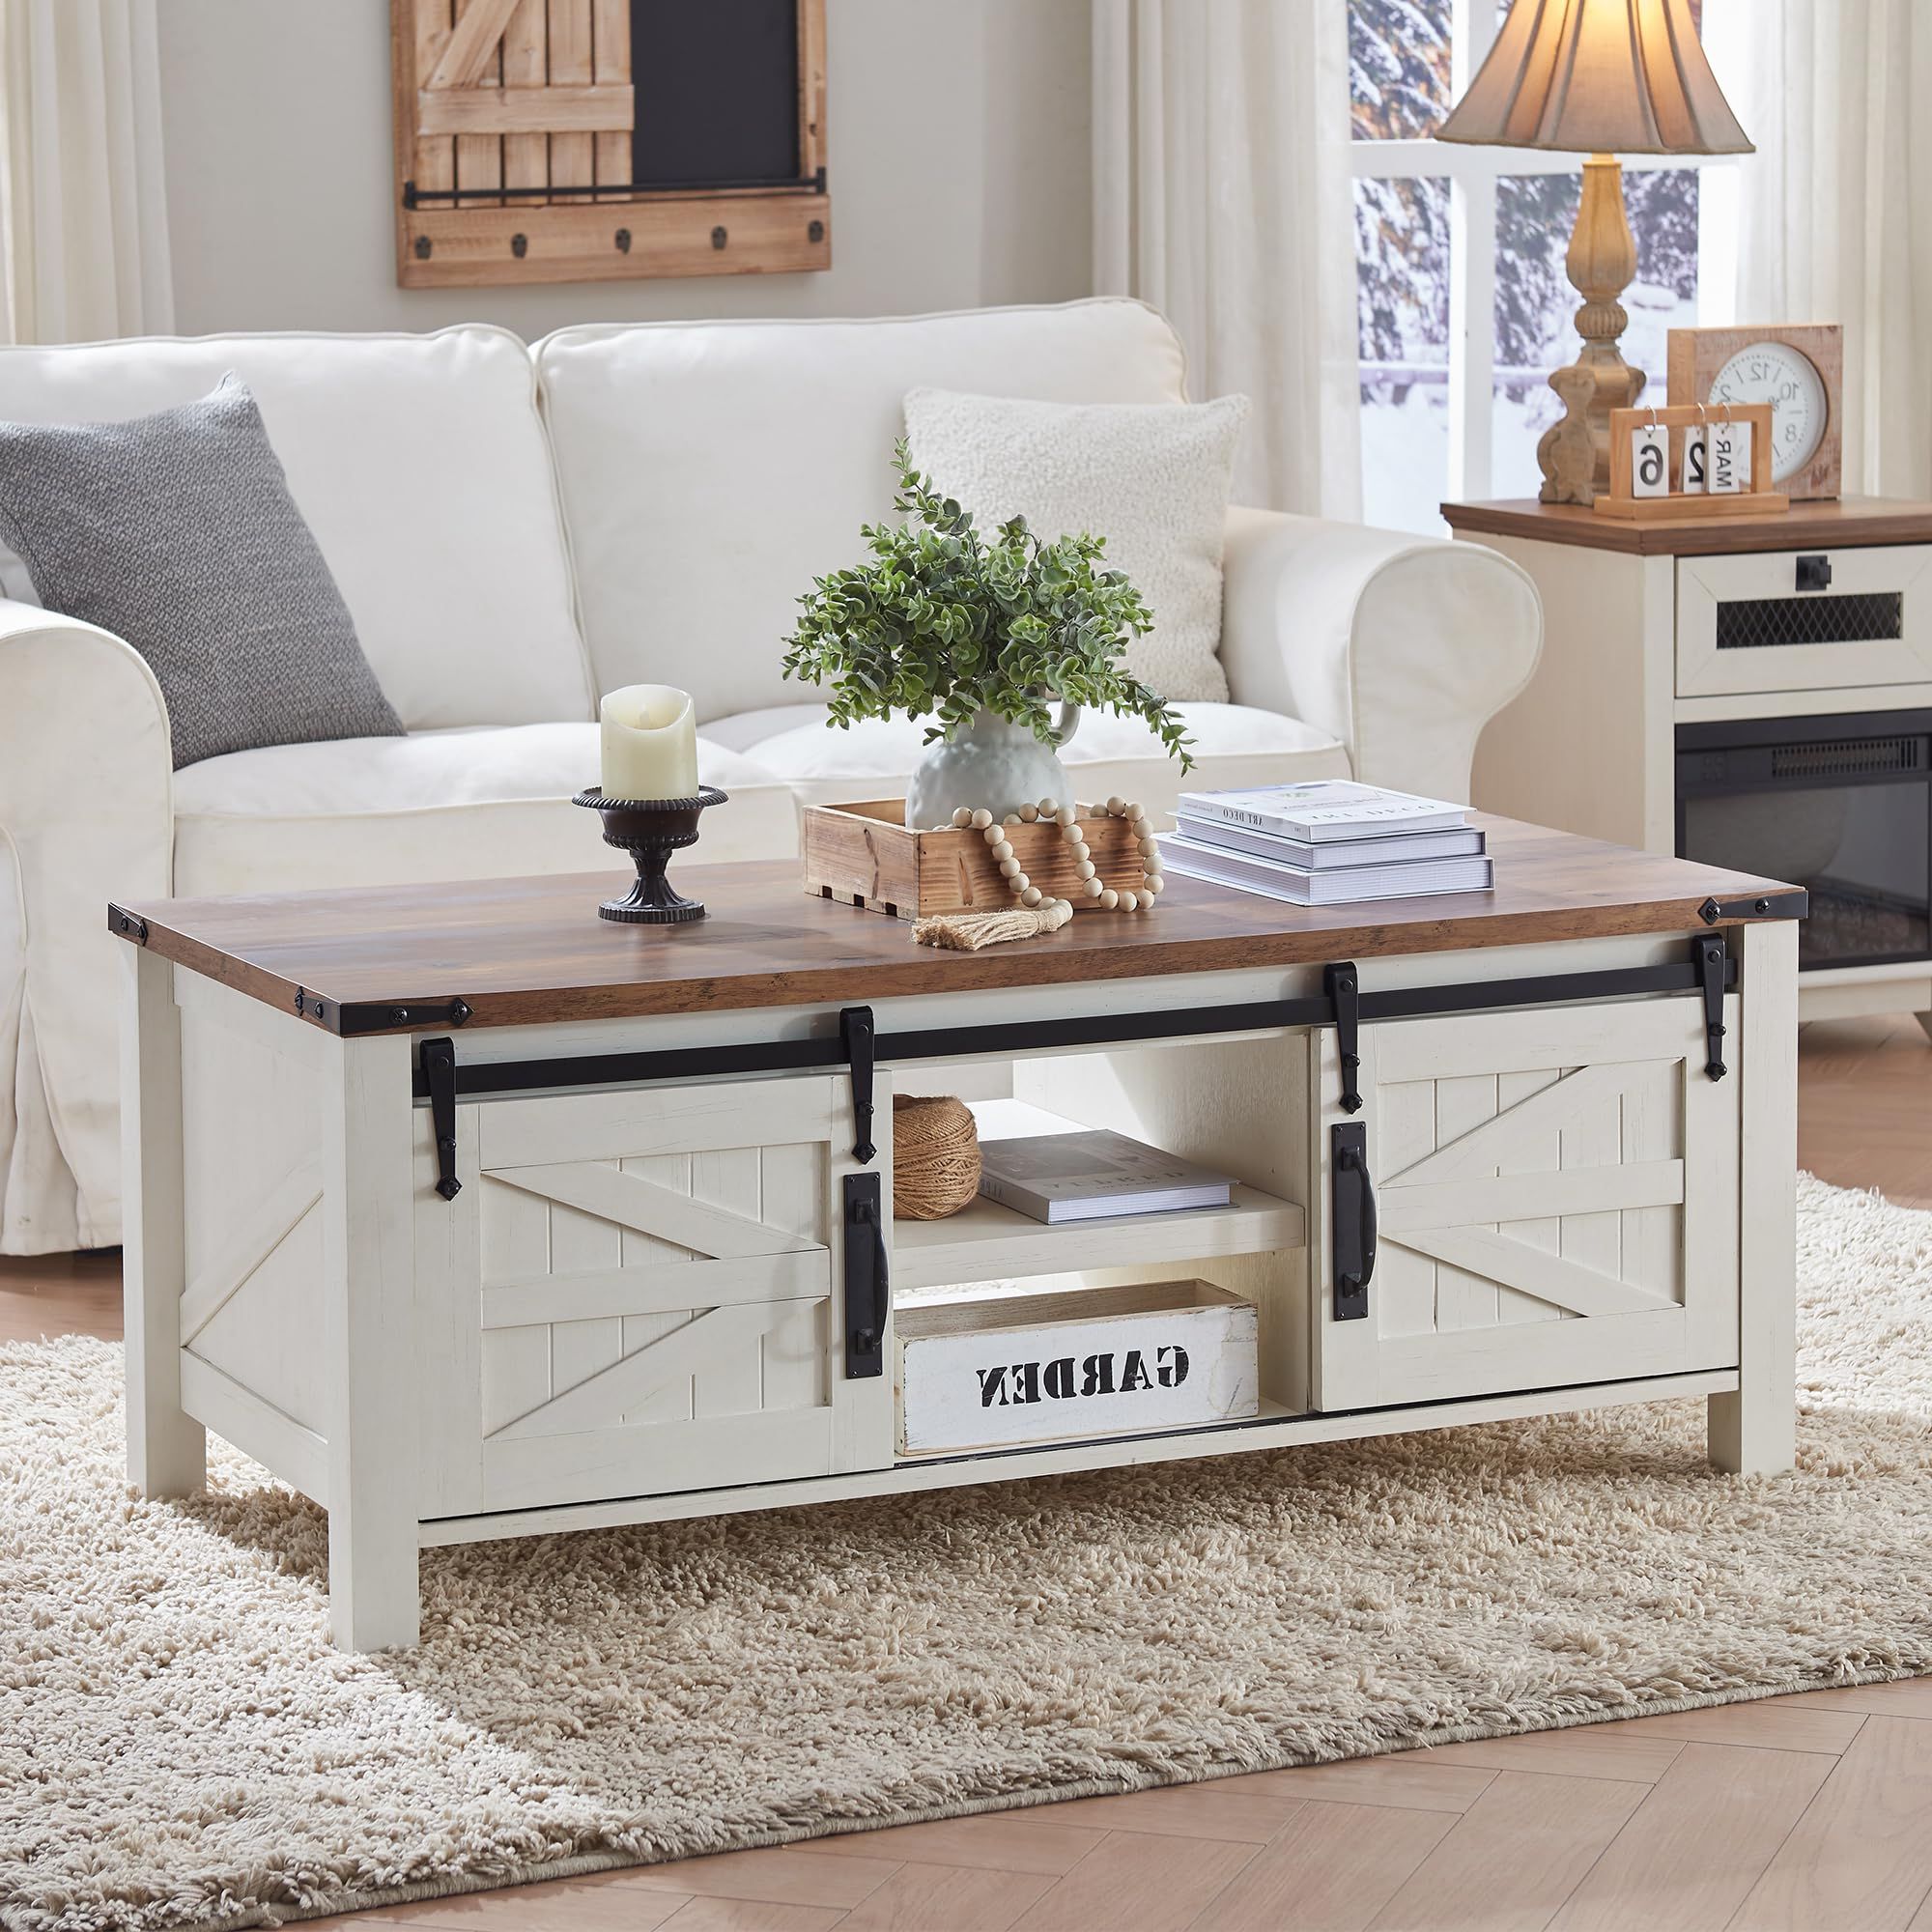 Coffee Tables With Storage And Barn Doors Pertaining To Trendy Amazon: Okd Farmhouse Coffee Table, 48" Storage Center Table With Sliding  Barn Doors, Rustic Wood Rectangular Cocktail Table With W/adjustable Shelves  For Living Room, Antique White : Home & Kitchen (View 6 of 10)